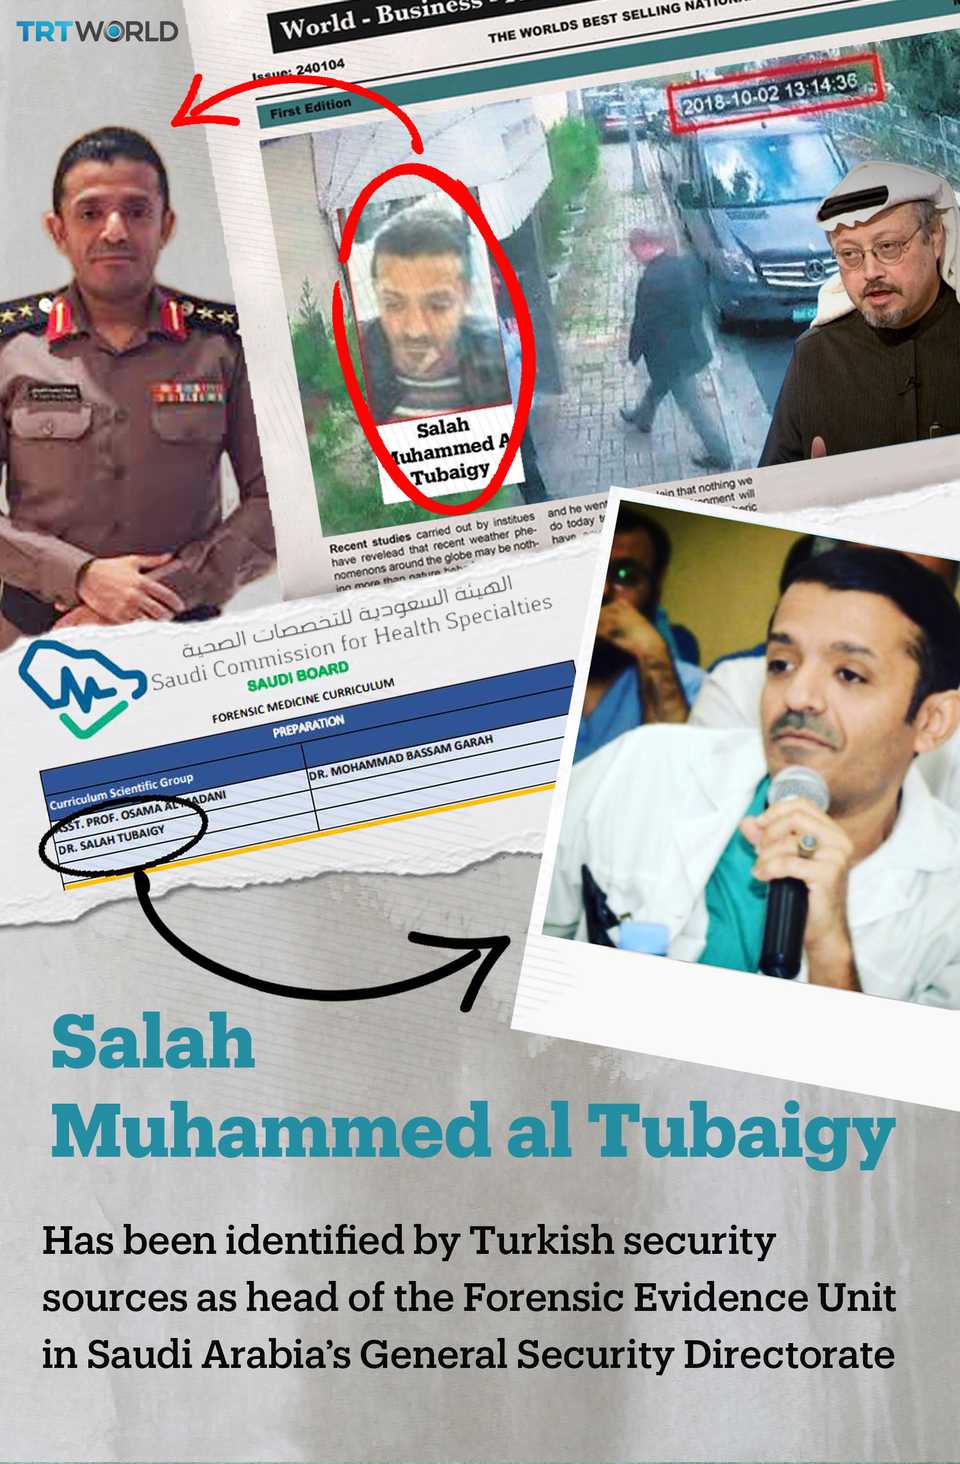 Sulah Muhammad al Tubaigy has been identified as one of the 15 men thought to be part of the alleged hit squad in the Jamal Khashoggi case. Khashoggi went missing from the Saudi Consulate in Istanbul on October 2, 2018.